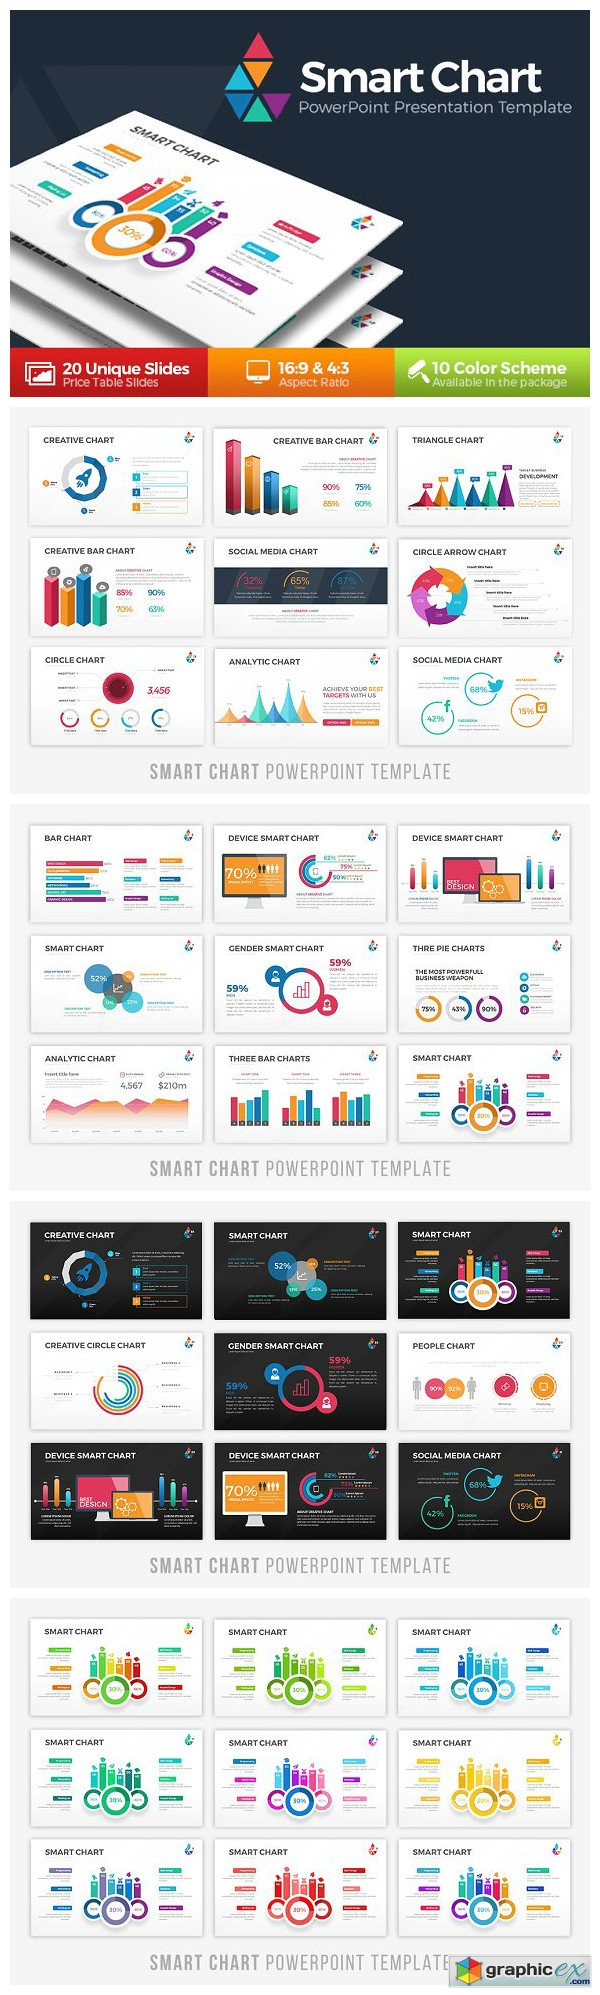 Smart Chart Infographic Powerpoint Free Download Vector Stock Image